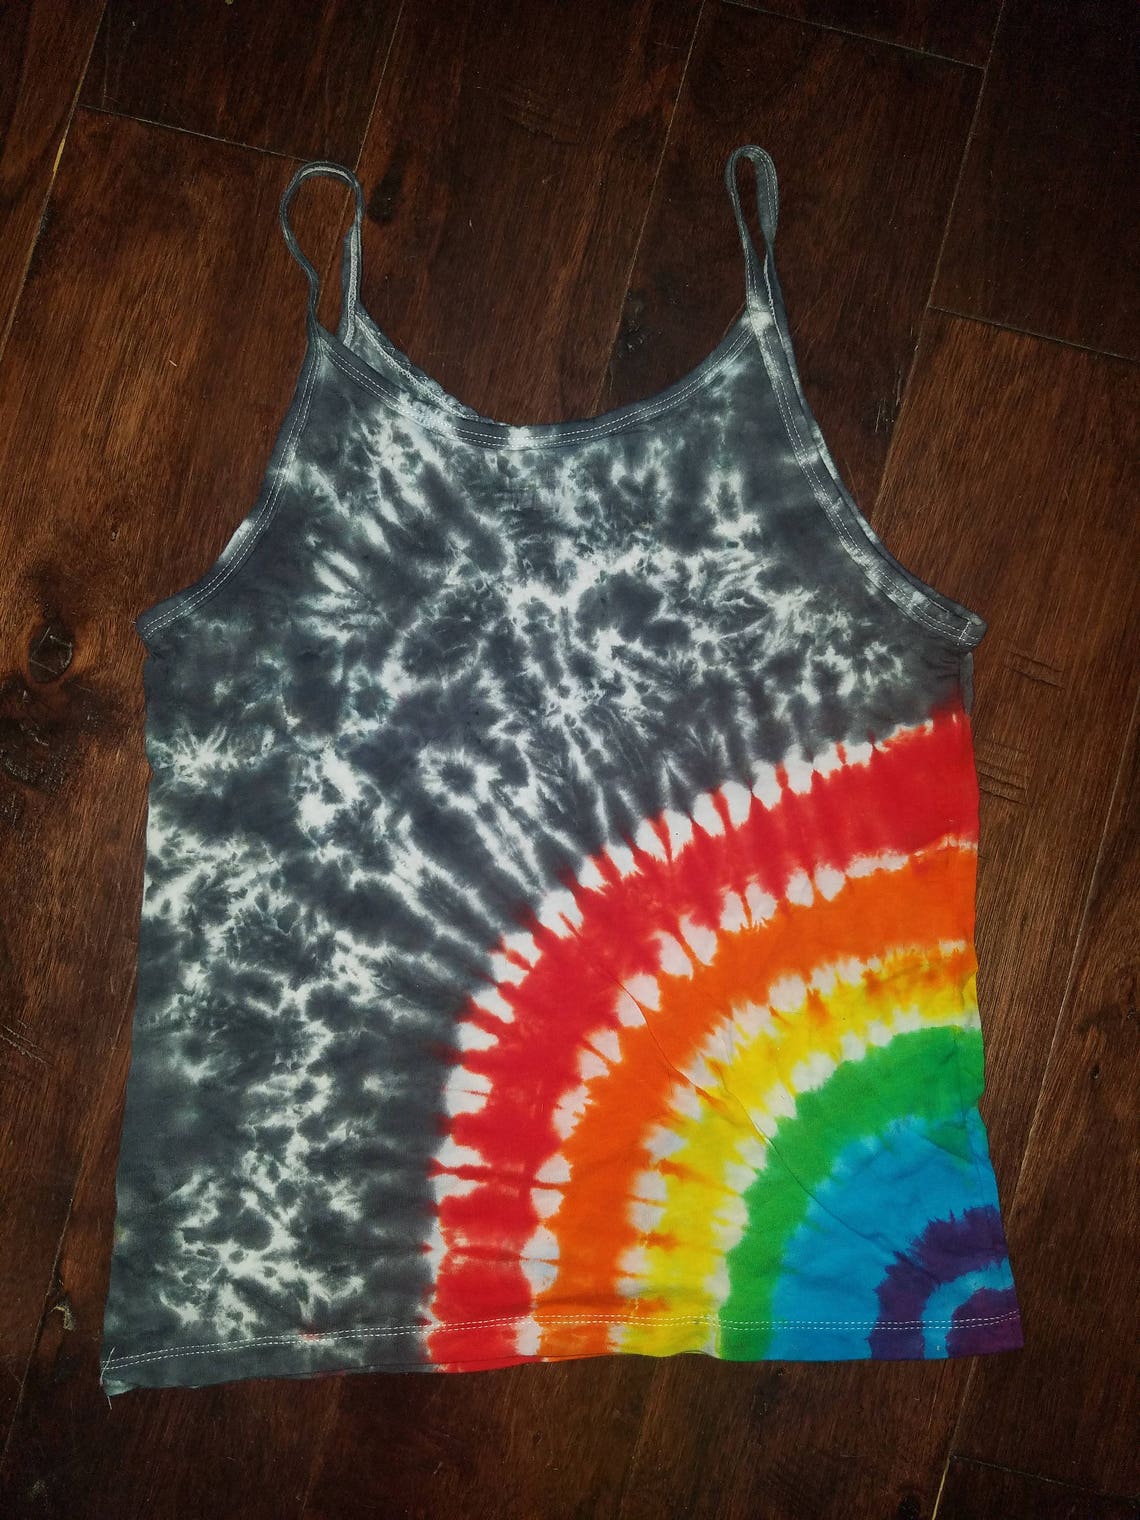 Girls youth large L hand dyed tie dye tank top gray rainbow | Etsy